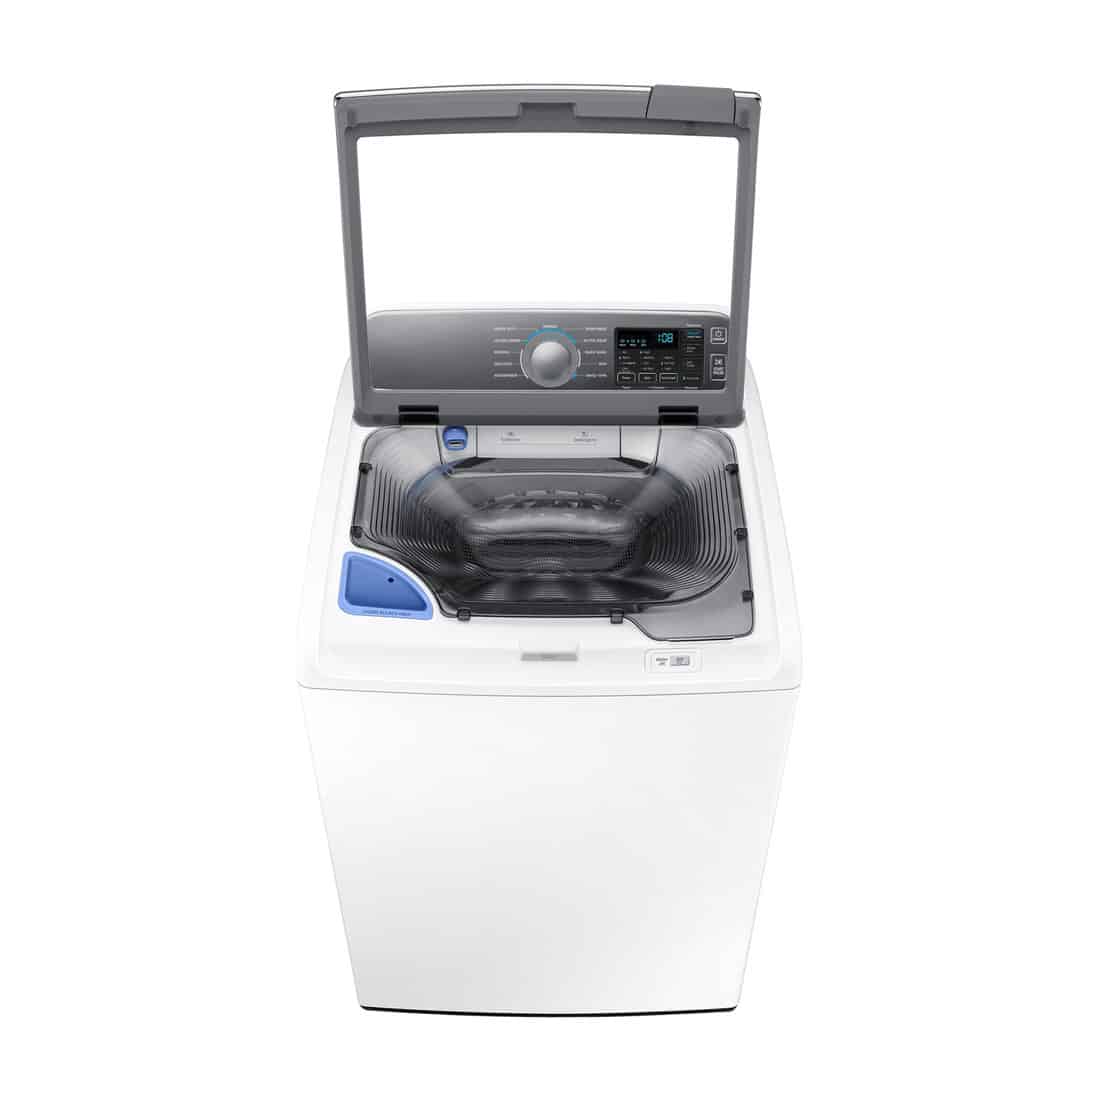 Open Top Load Washing Machine Isolated on White. Household and Domestic Appliances. Home Innovation. Side Top View of White Fully Automatic Top Loading Washer with Integrated Control Panel